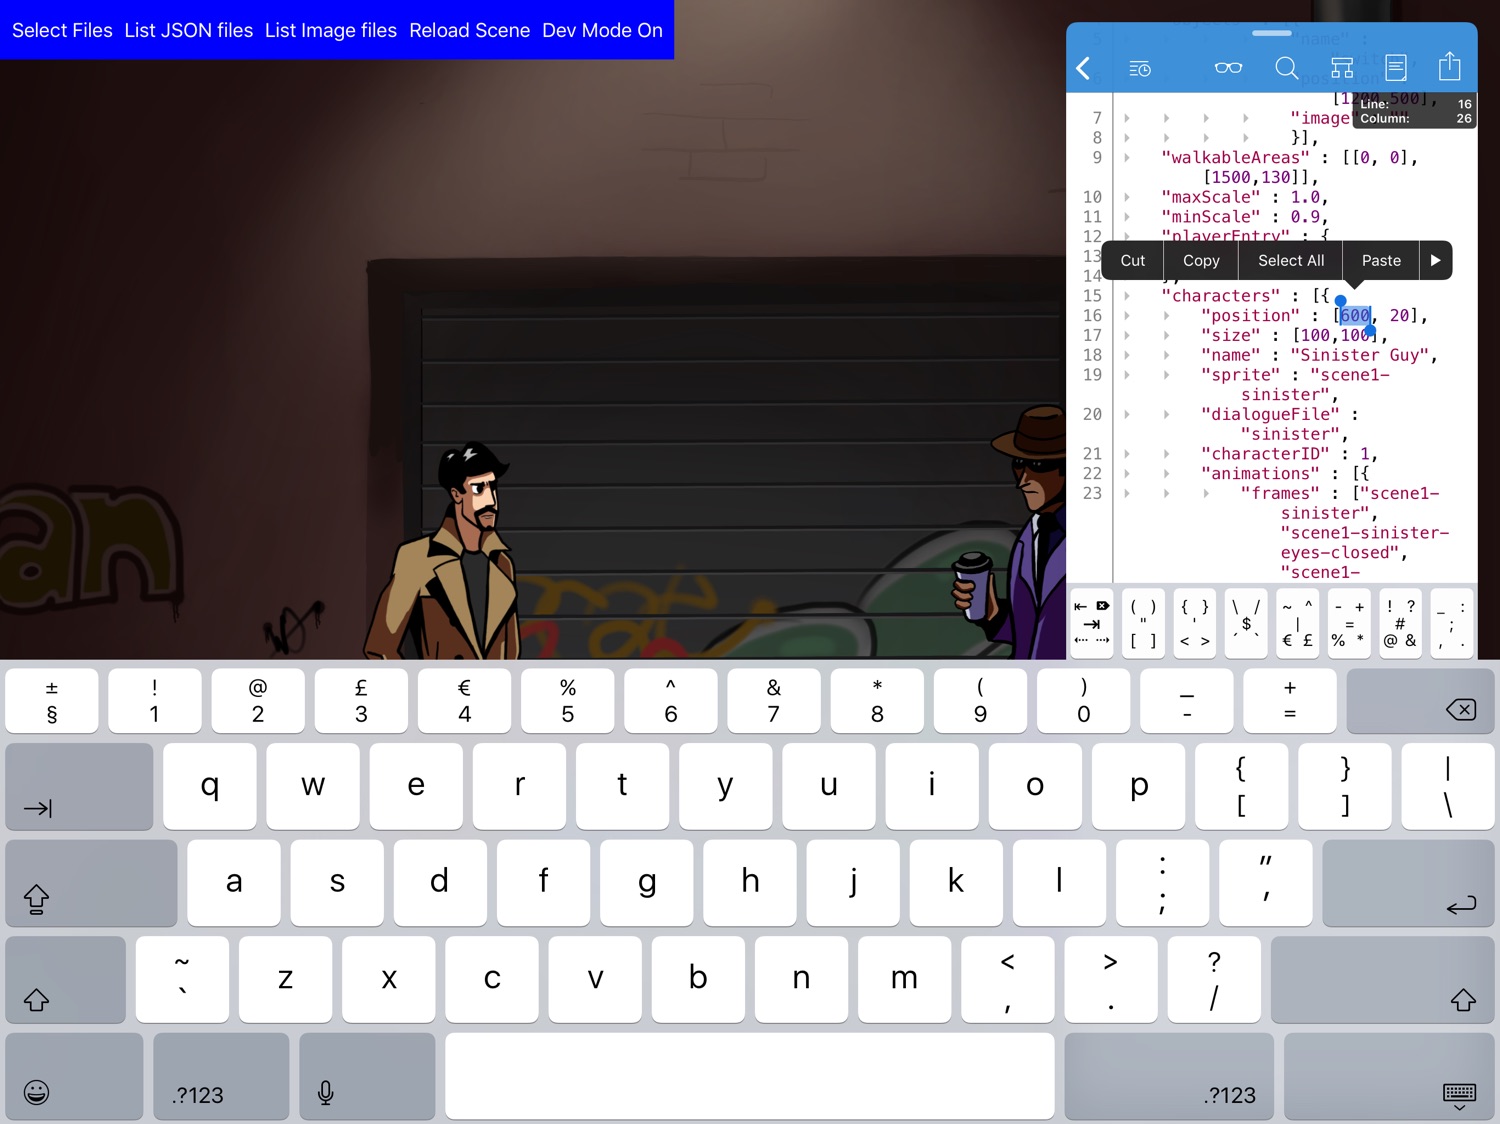 A screenshot of my adventure game scene. Textastic is open over it and the scene file is being edited. The non-player character's position is being changed.